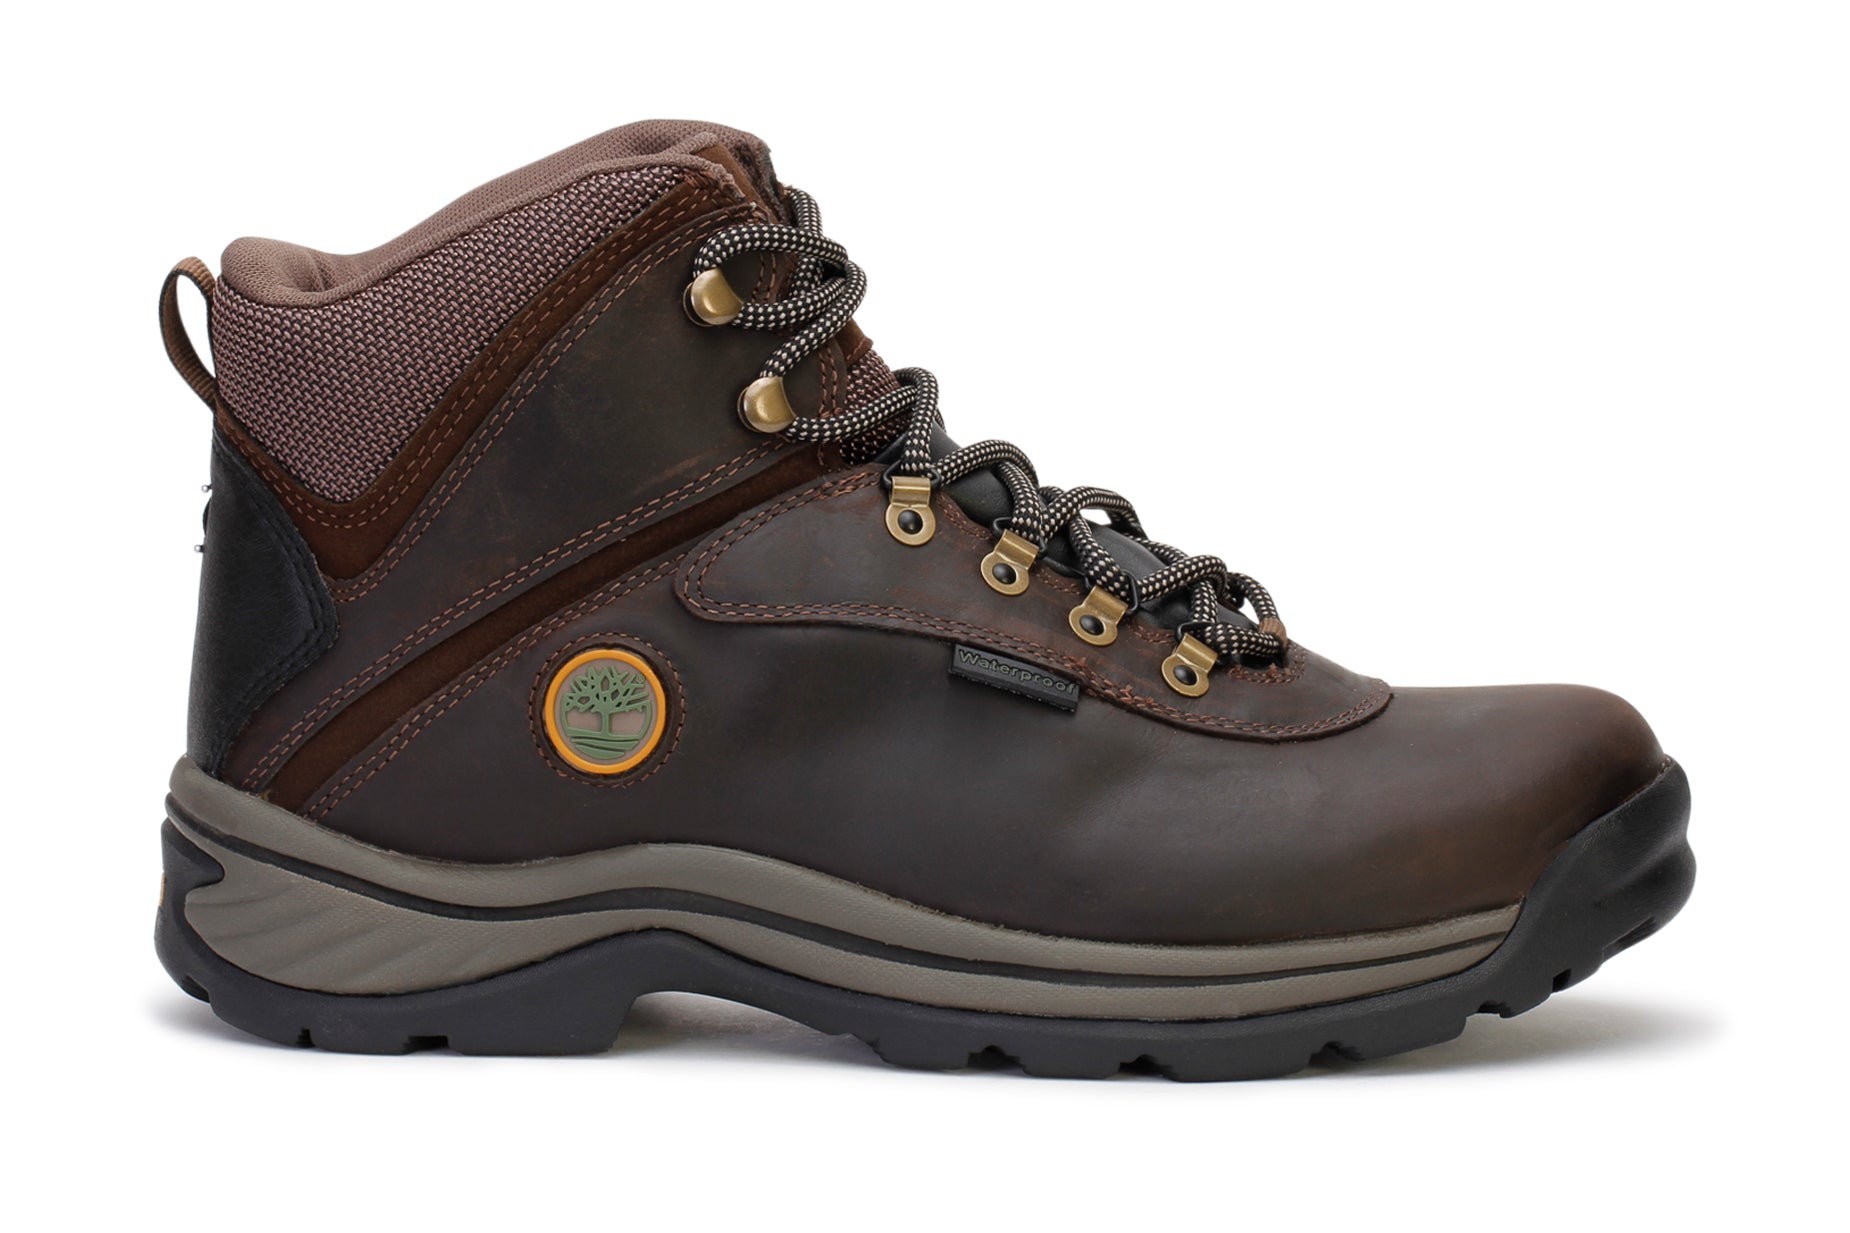 timberland-mens-mid-boots-white-ledge-waterproof-brown-brown-12135-main